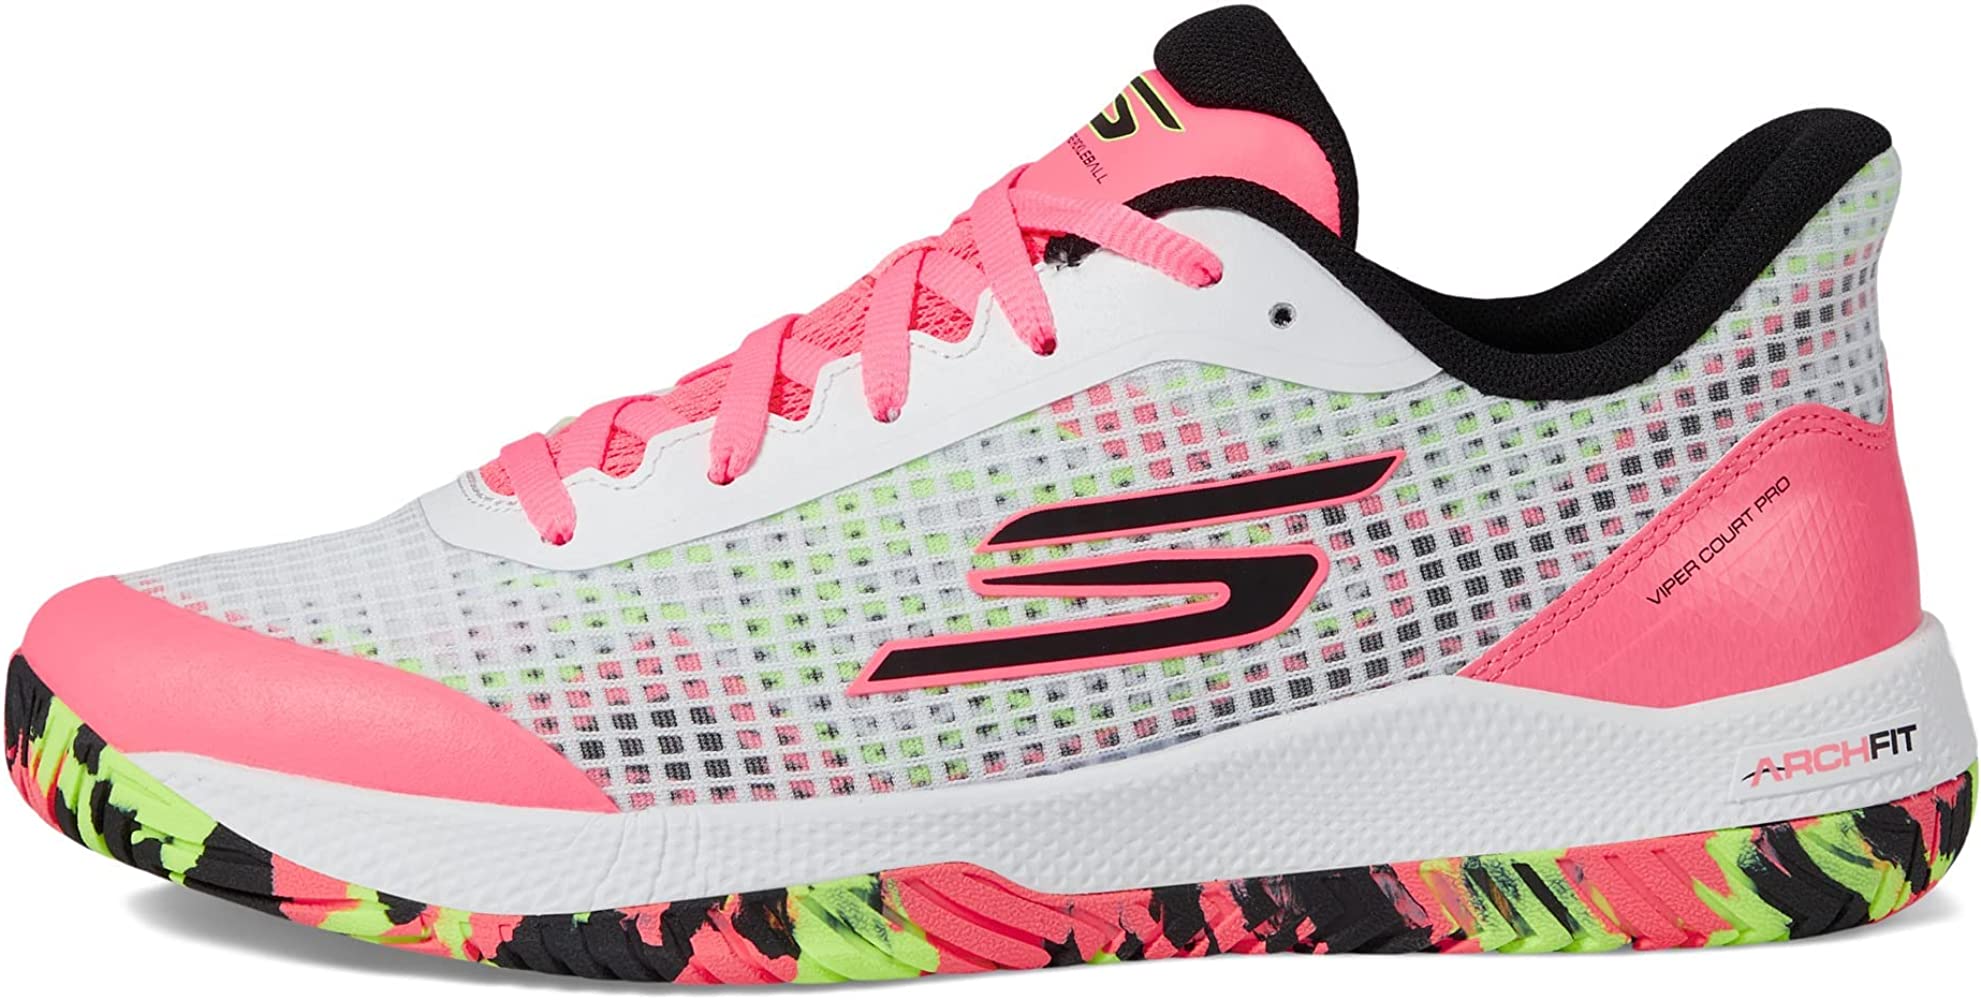 The Best Pickleball Shoes - Sketches Go Train